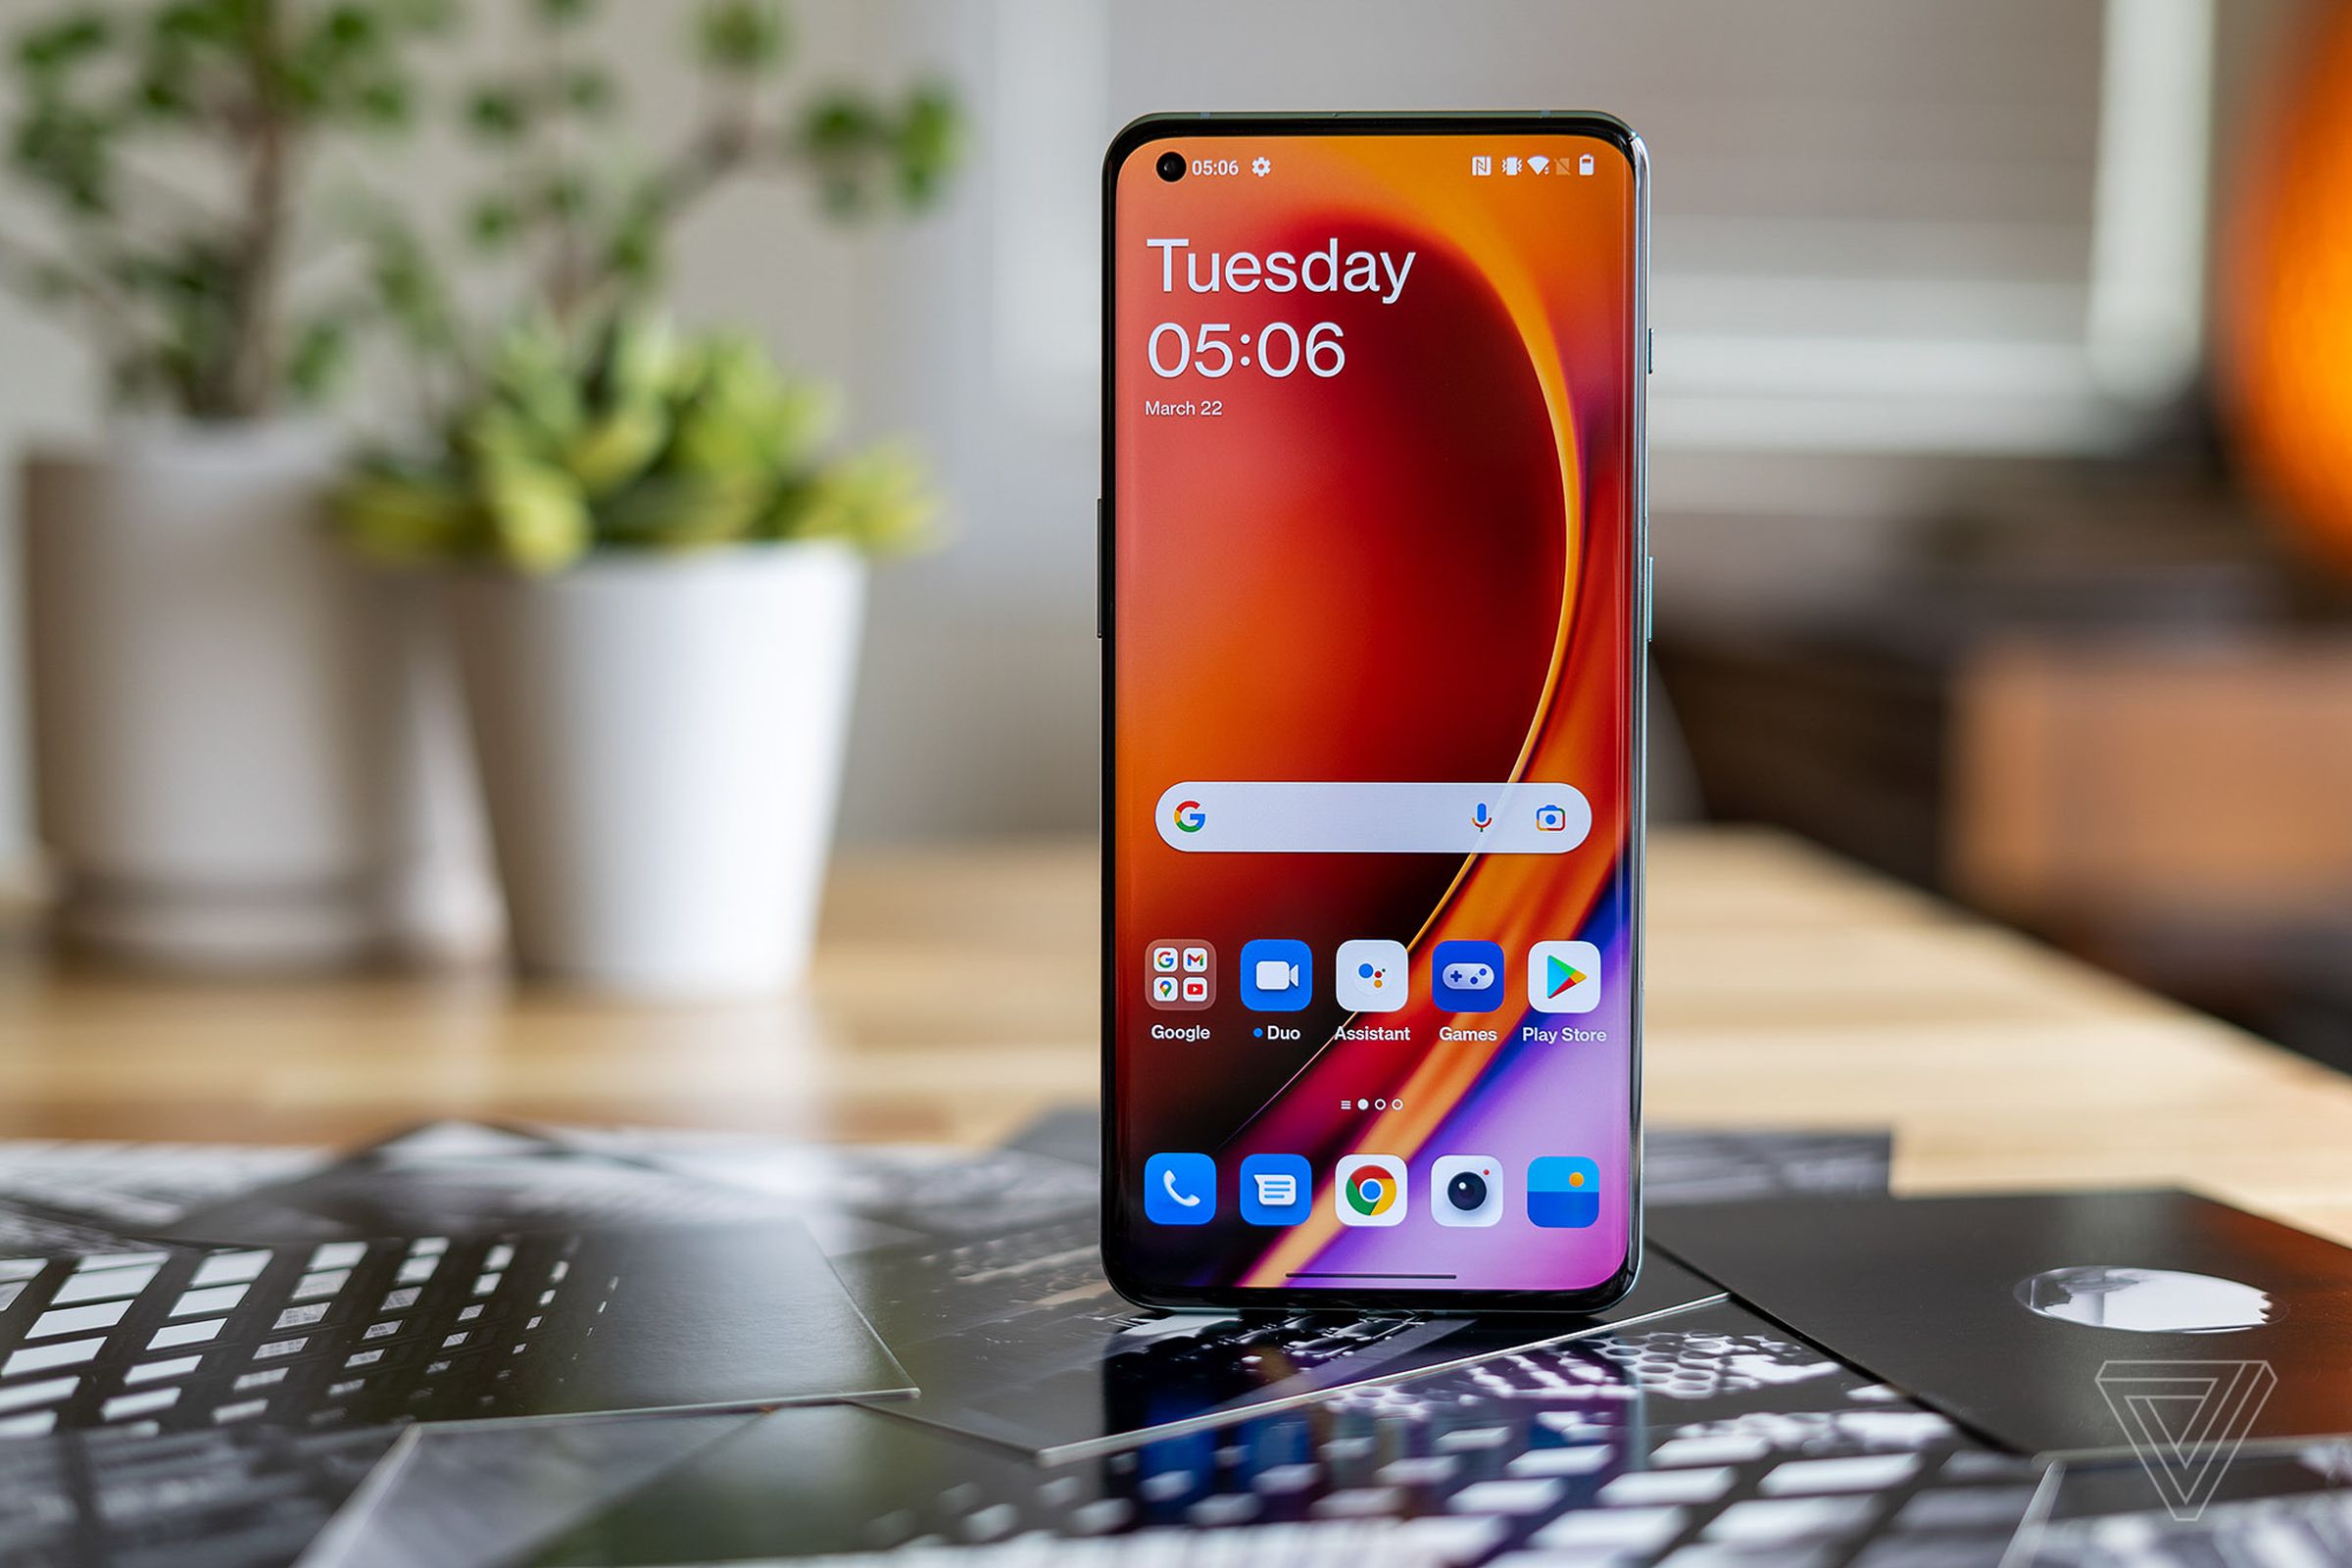 The 10 Pro’s 6.7-inch screen is a little taller than the competition and offers a fast 120Hz refresh rate.